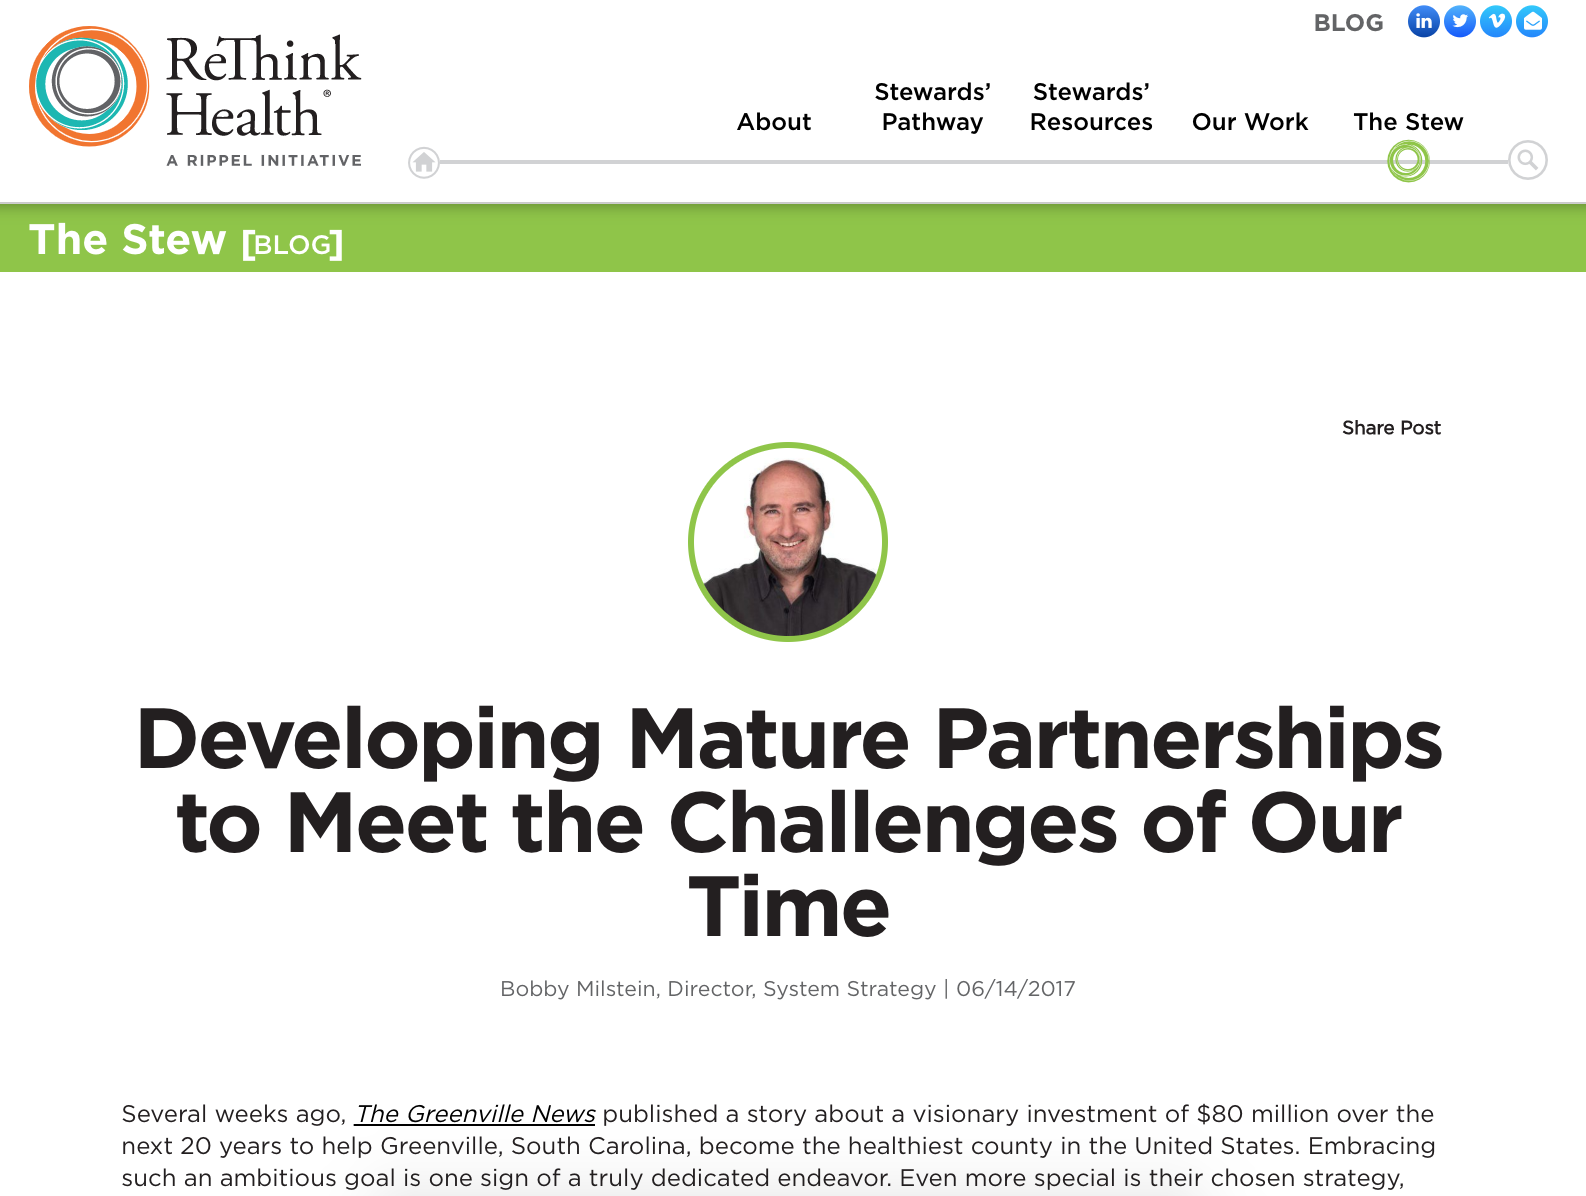 Developing Mature Partnerships to Meet the Challenges of Our Time